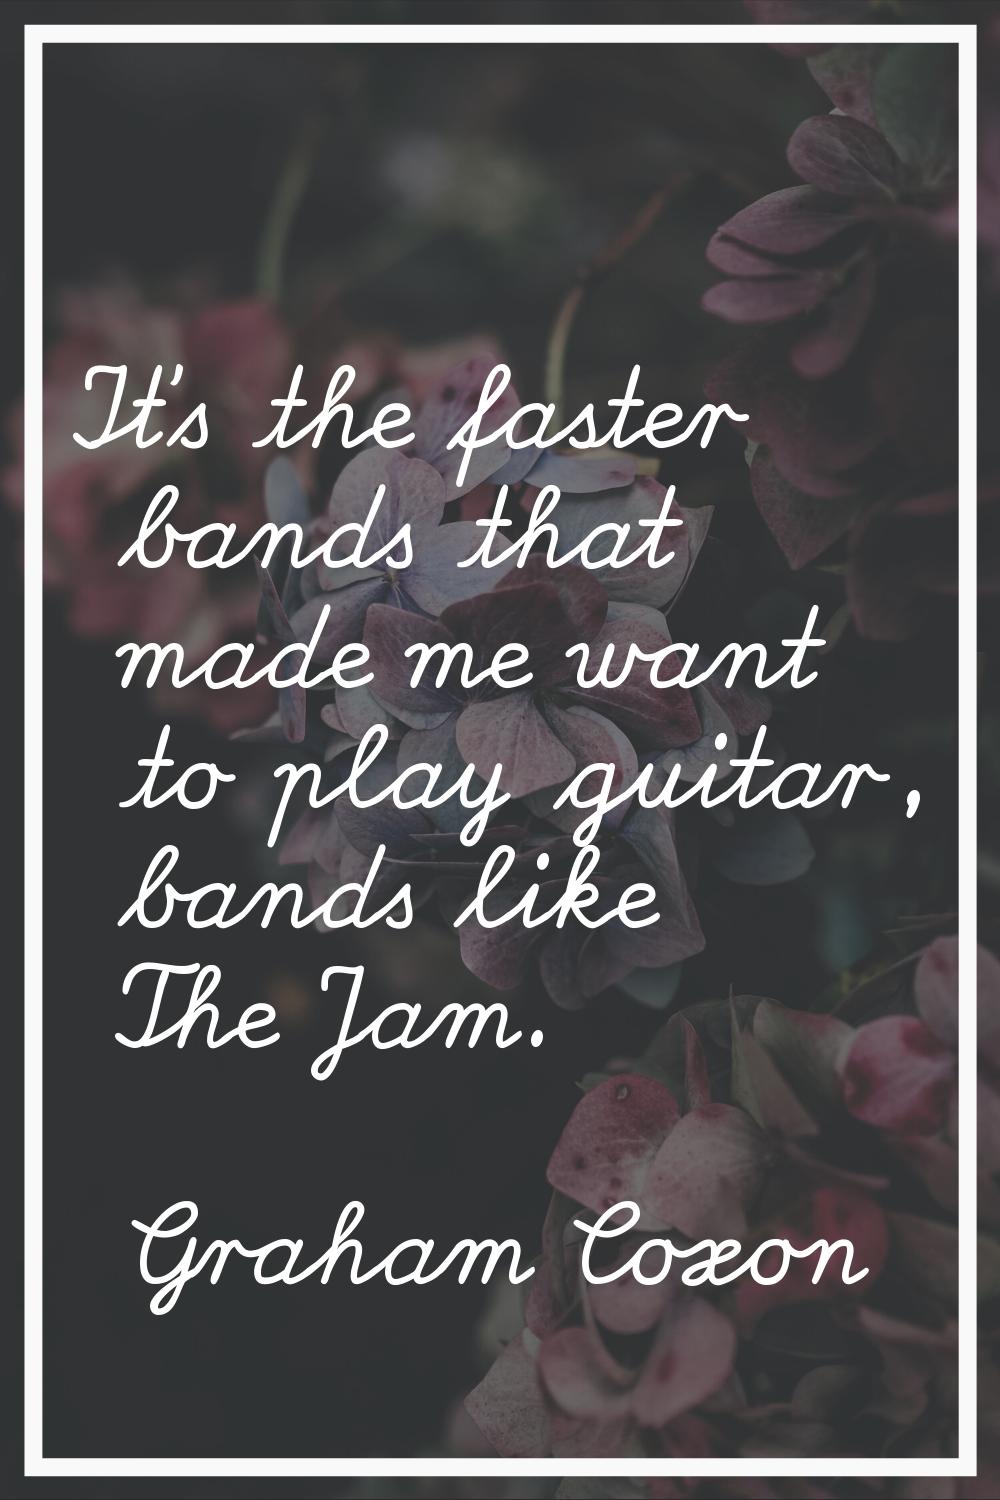 It's the faster bands that made me want to play guitar, bands like The Jam.